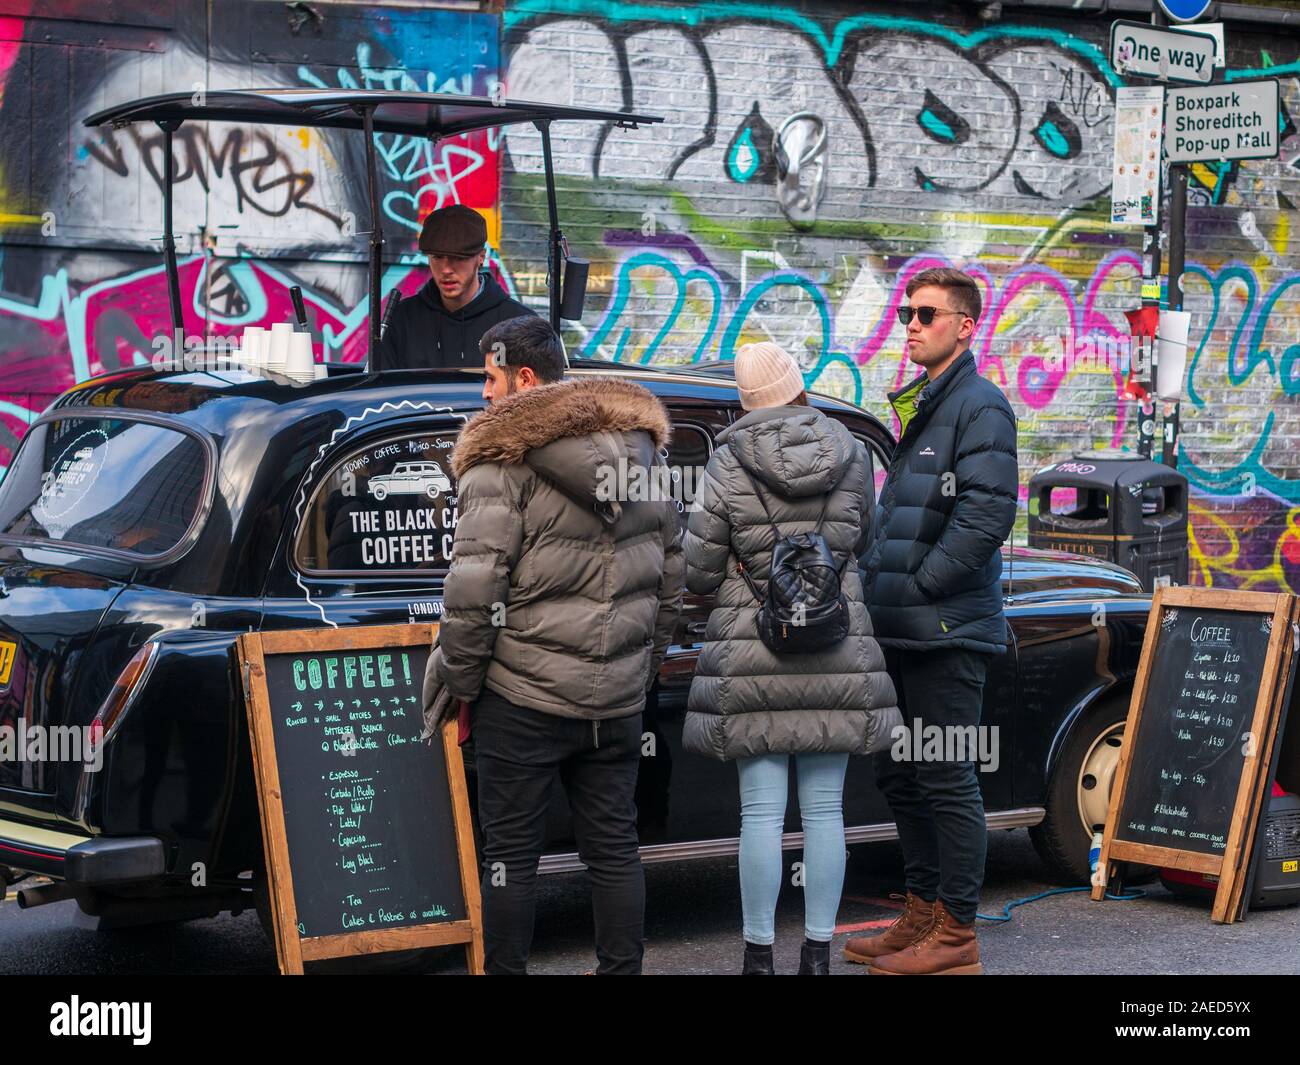 Brick Lane Coffee - London Taxi Coffee - Black Cab Coffee Company uses a converted London Taxi to serve coffee in Brick Lane Shoreditch East London. Stock Photo